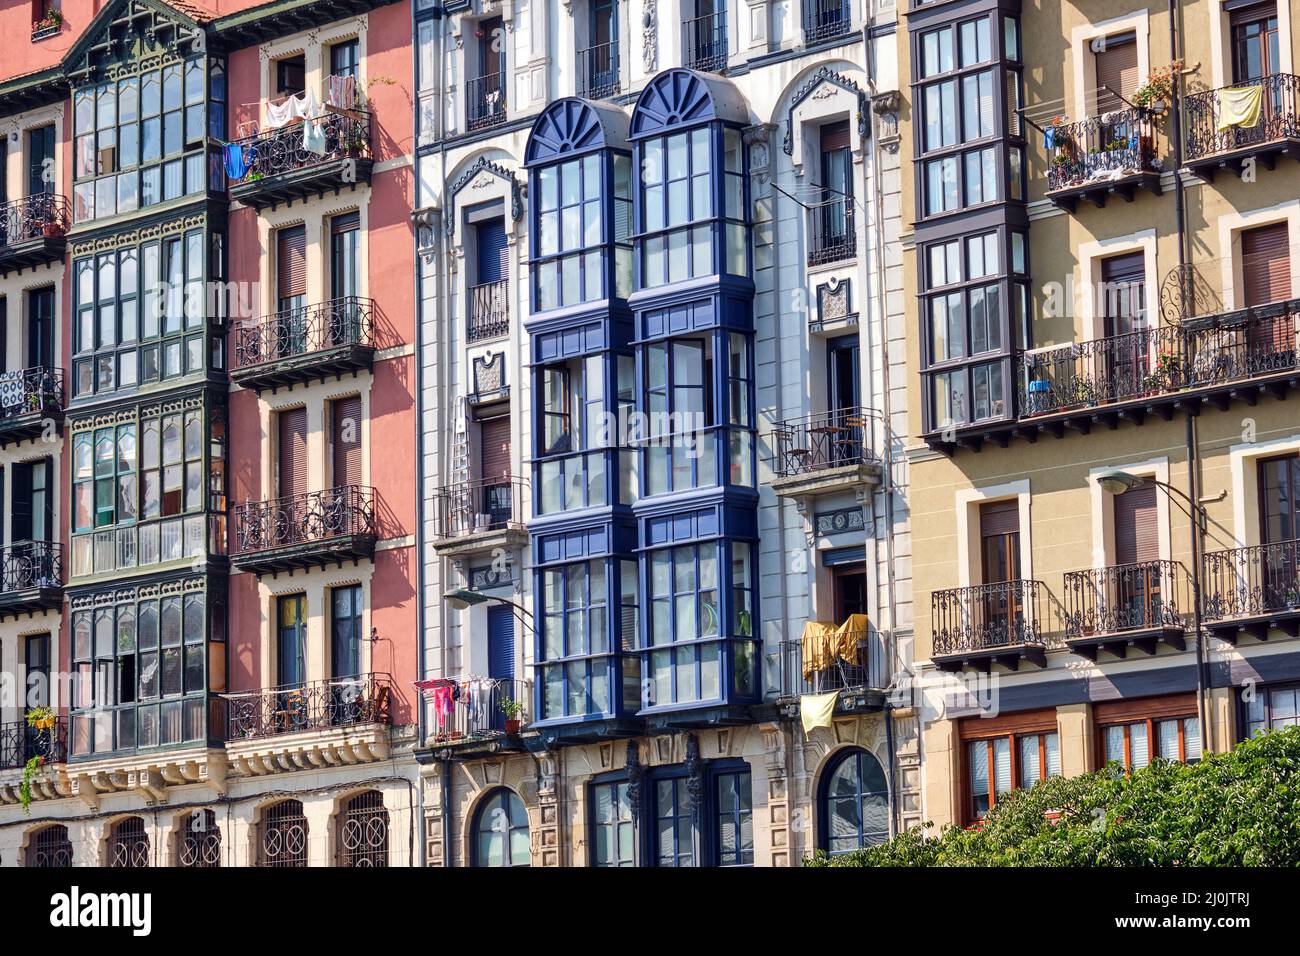 Some typical house facades of the old town of Bilbao in Spain Stock Photo